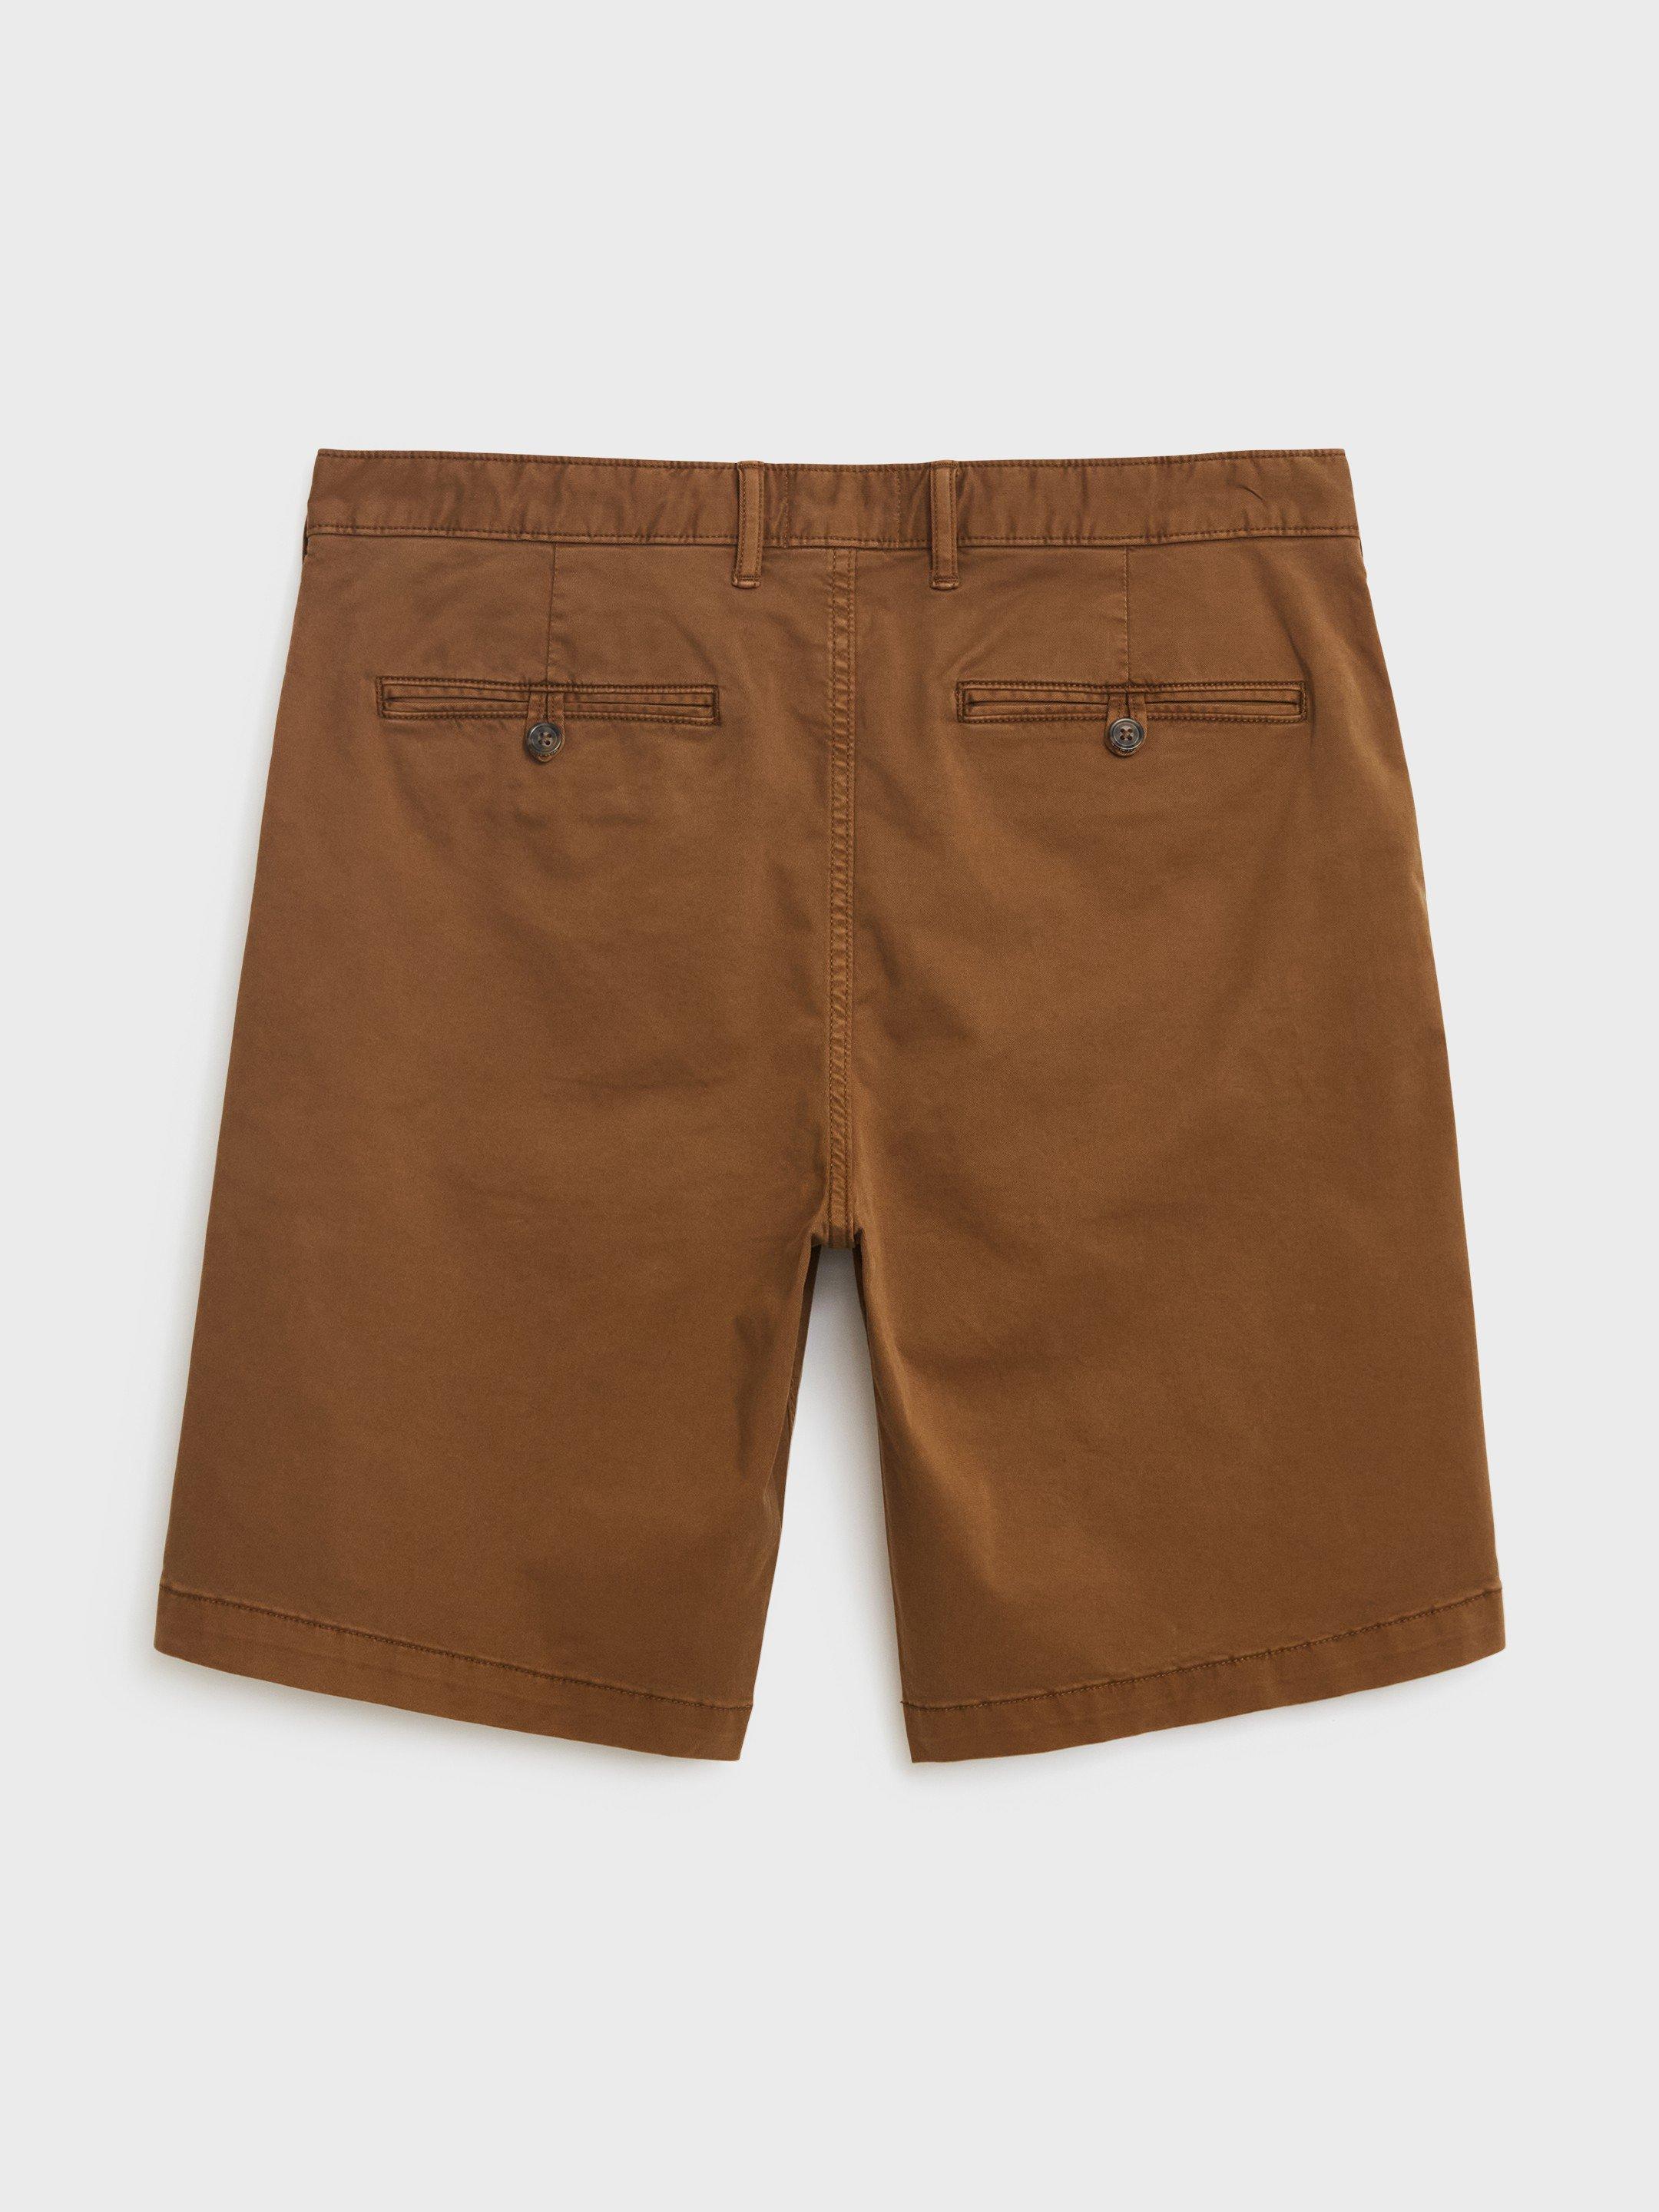 Sutton Organic Chino Shorts in MID BROWN - FLAT BACK